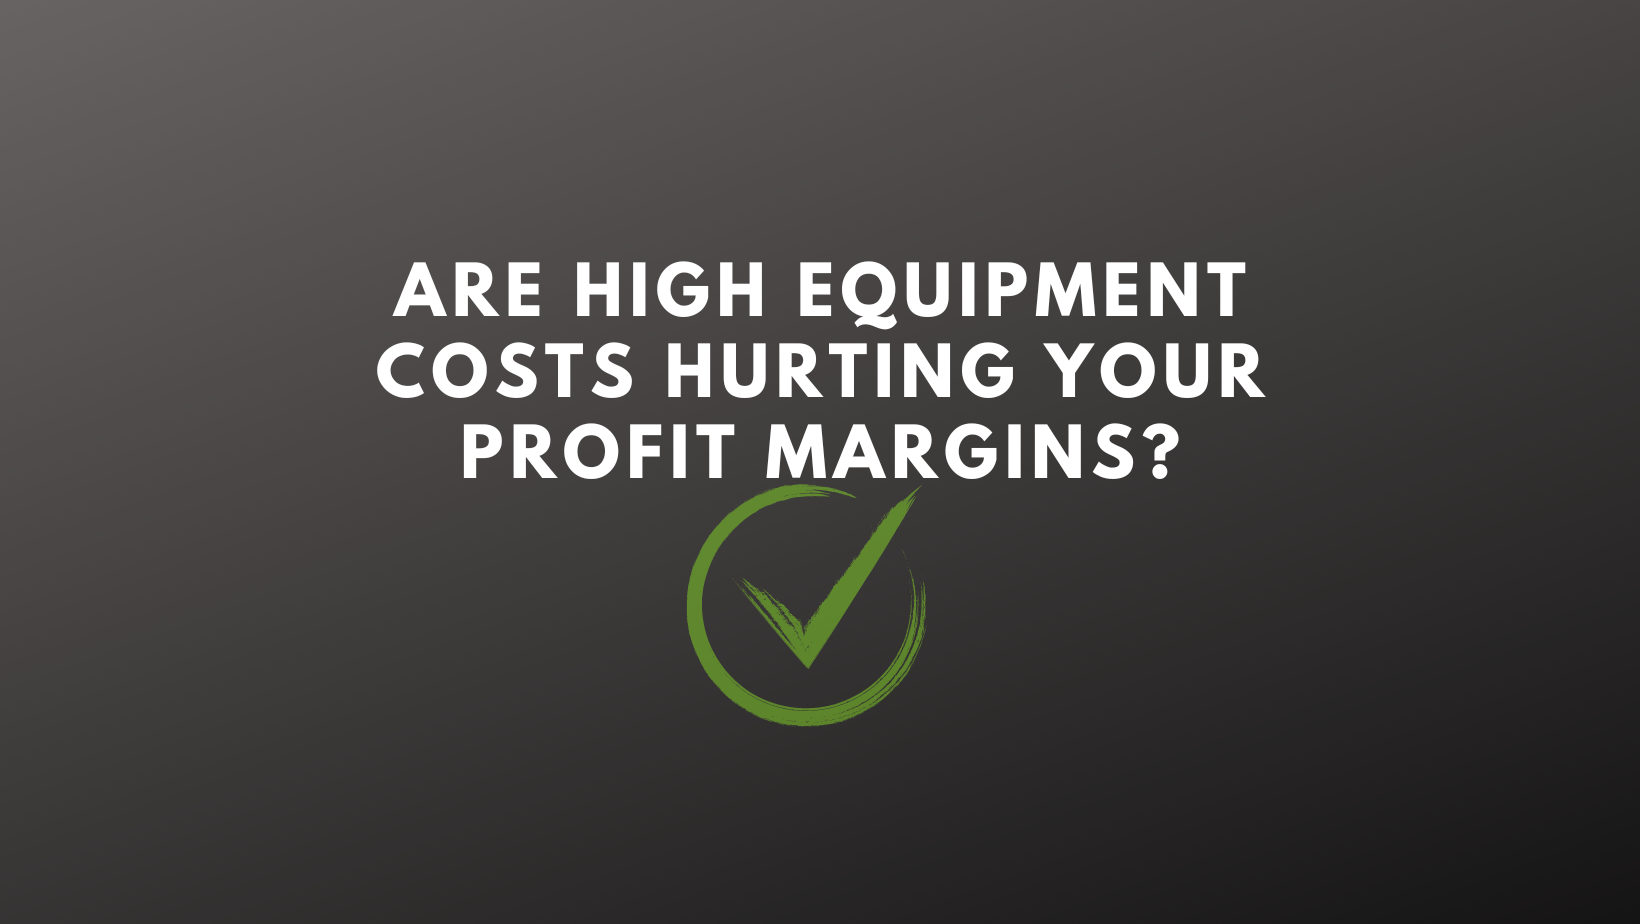 Are high equipment costs hurting your profit margins?